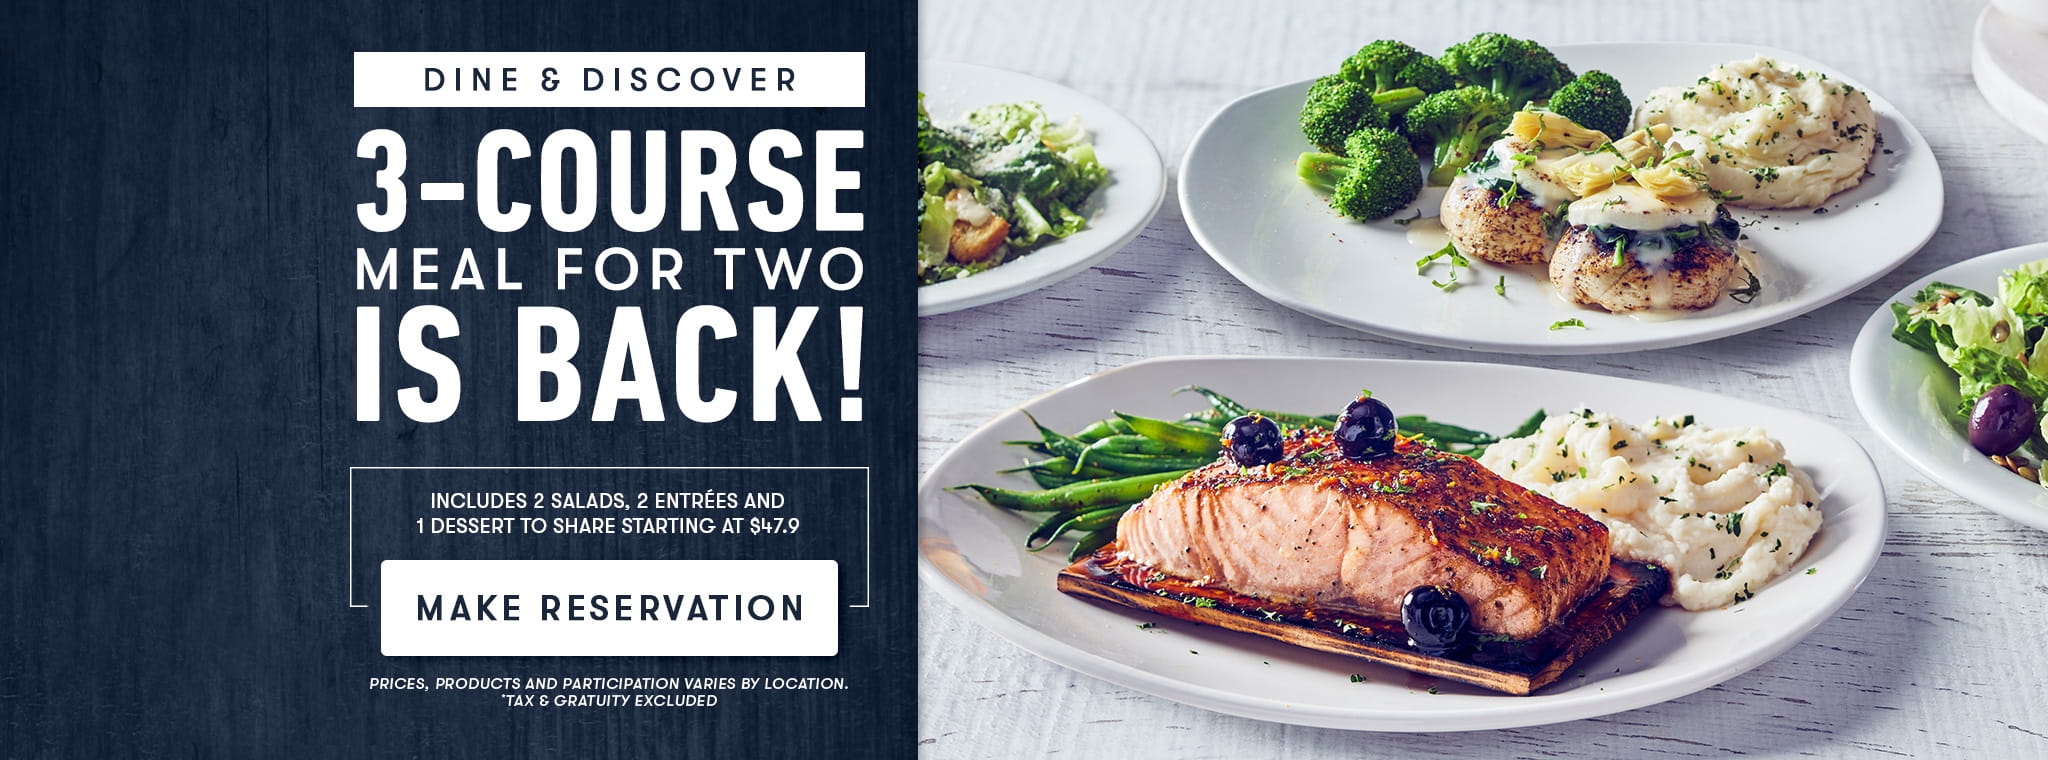 Dine &amp; Discover 3-Course Meal For Two Is Back!